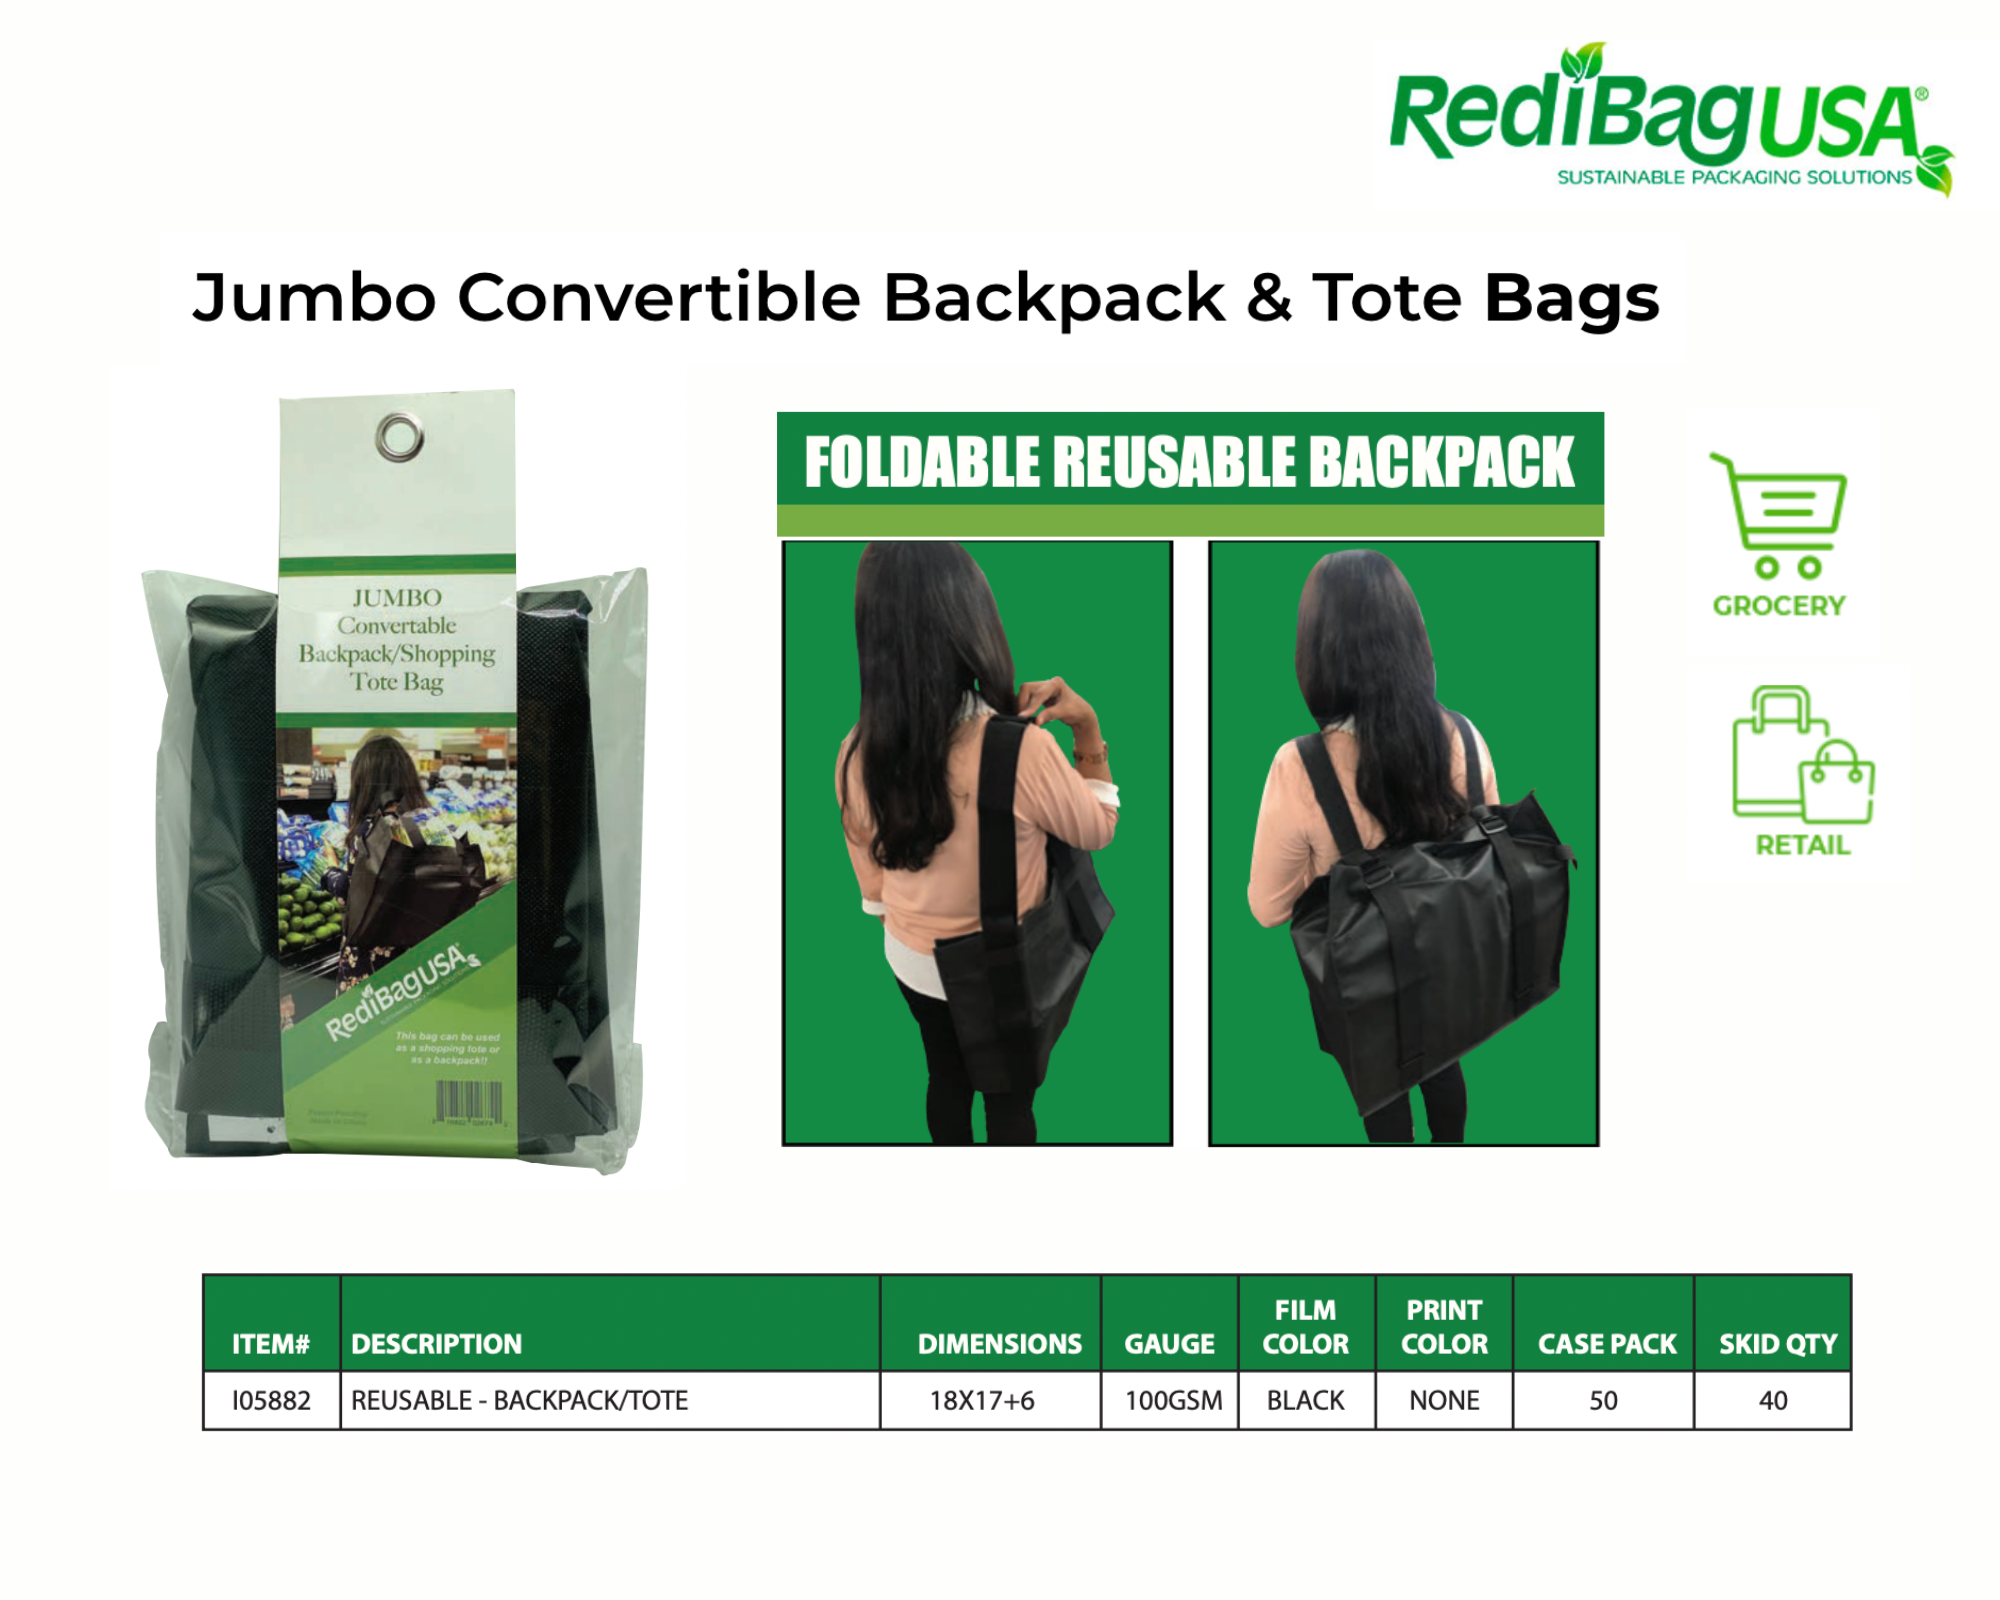 An image describing the specifications, uses, and sizes of convertible bags from RedibagUSA.